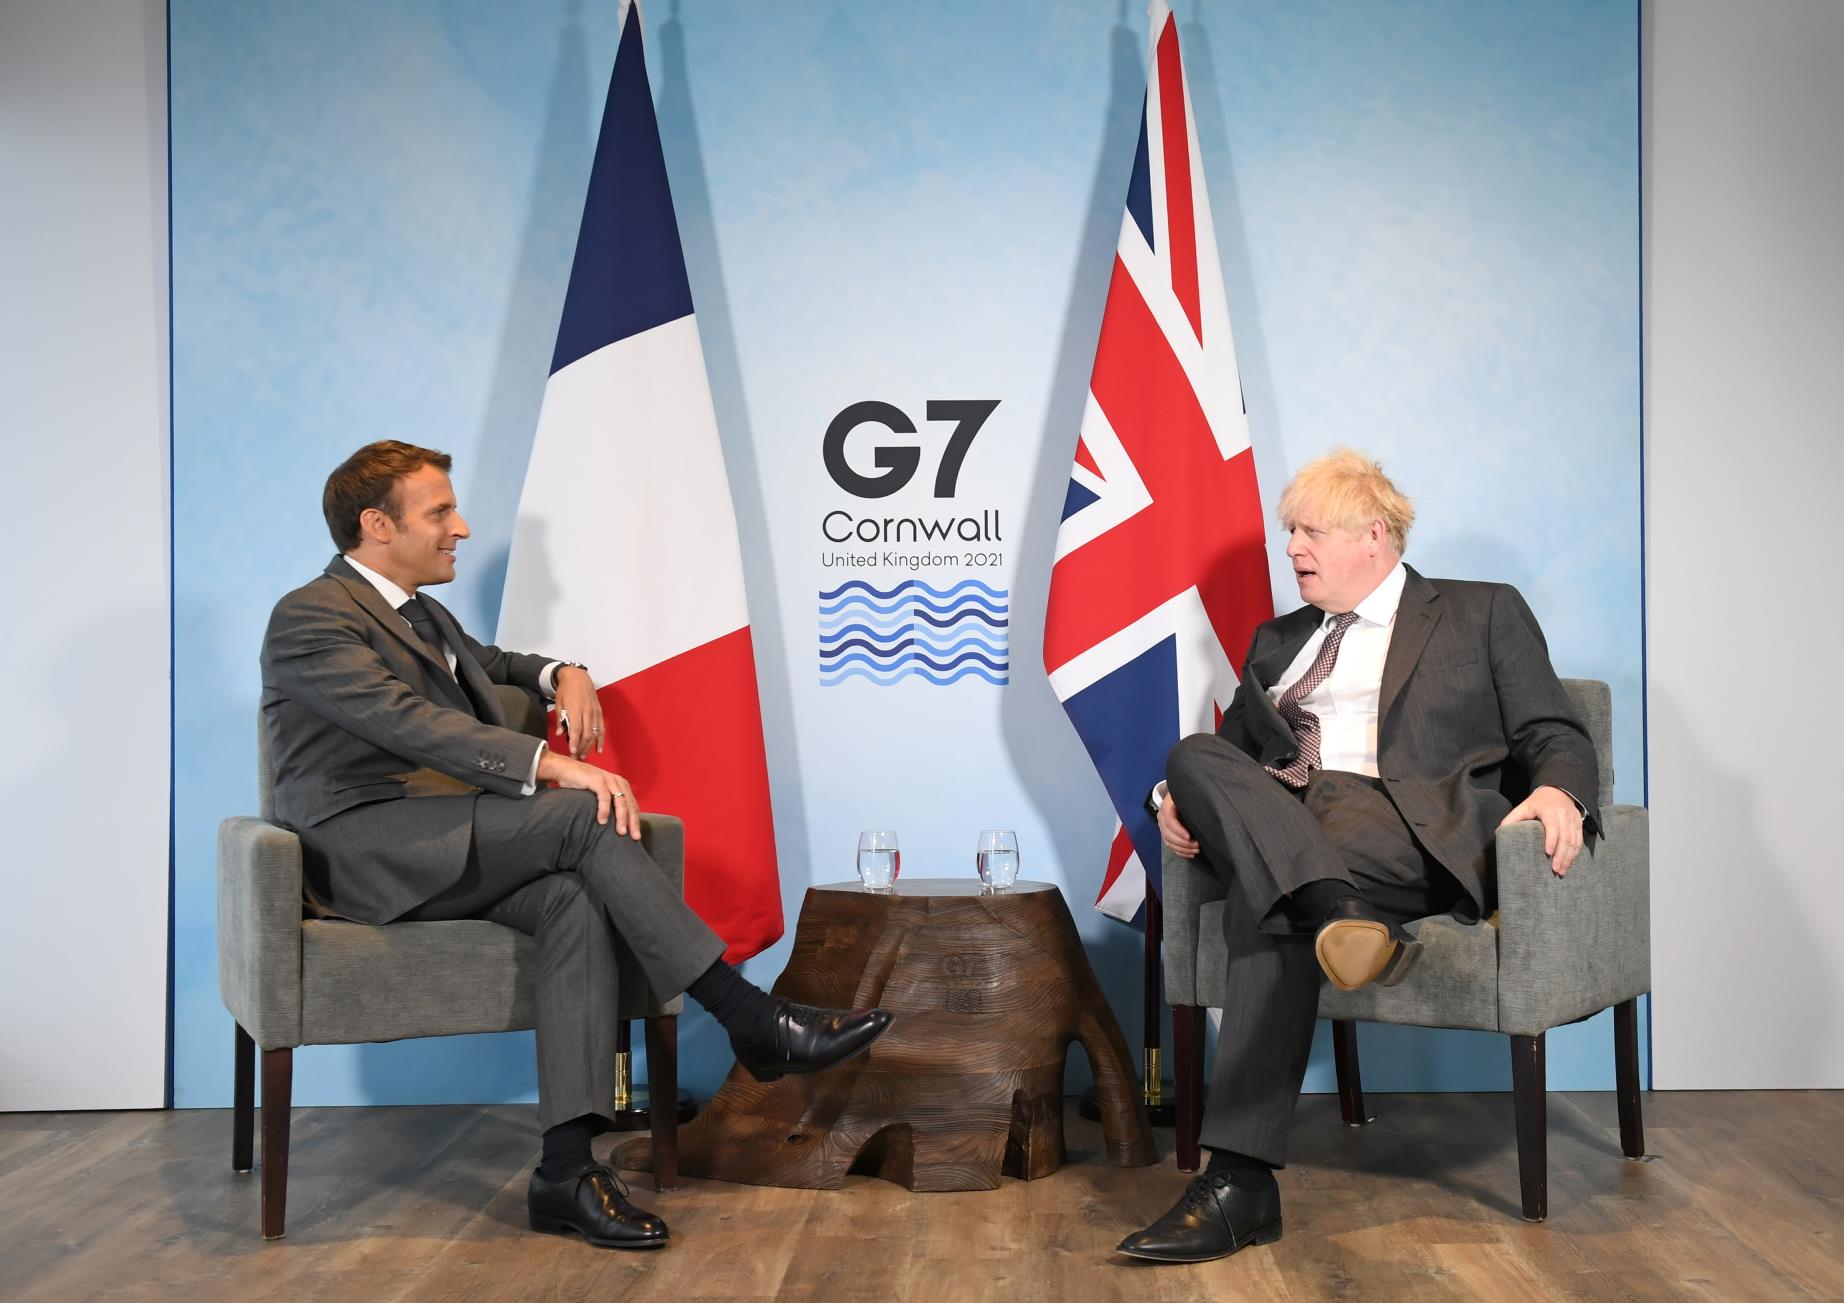 Britain's Prime Minister Boris Johnson and France's President Emmanuel Macron attend a bilateral meeting during G7 summit in Carbis Bay, Cornwall, Britain, June 12, 2021. Stefan Rousseau/Pool via REUTERS